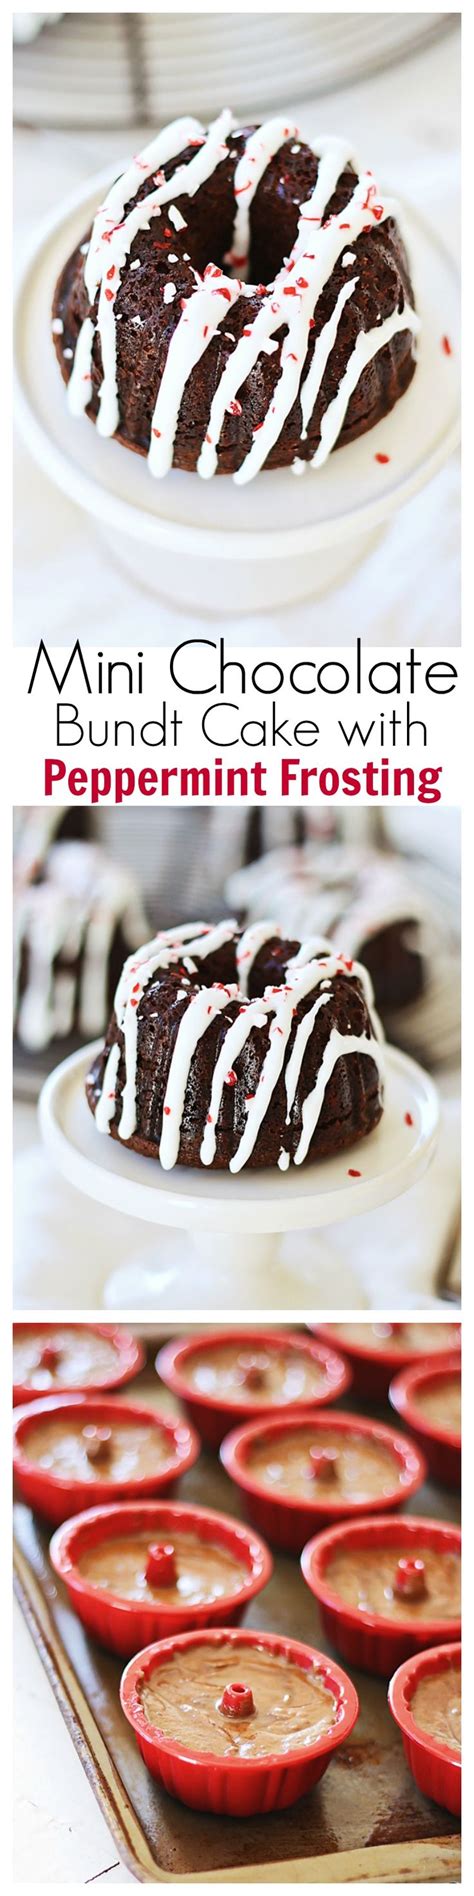 More dairy free cake recipes Mini Chocolate Bundt Cakes with Peppermint Frosting